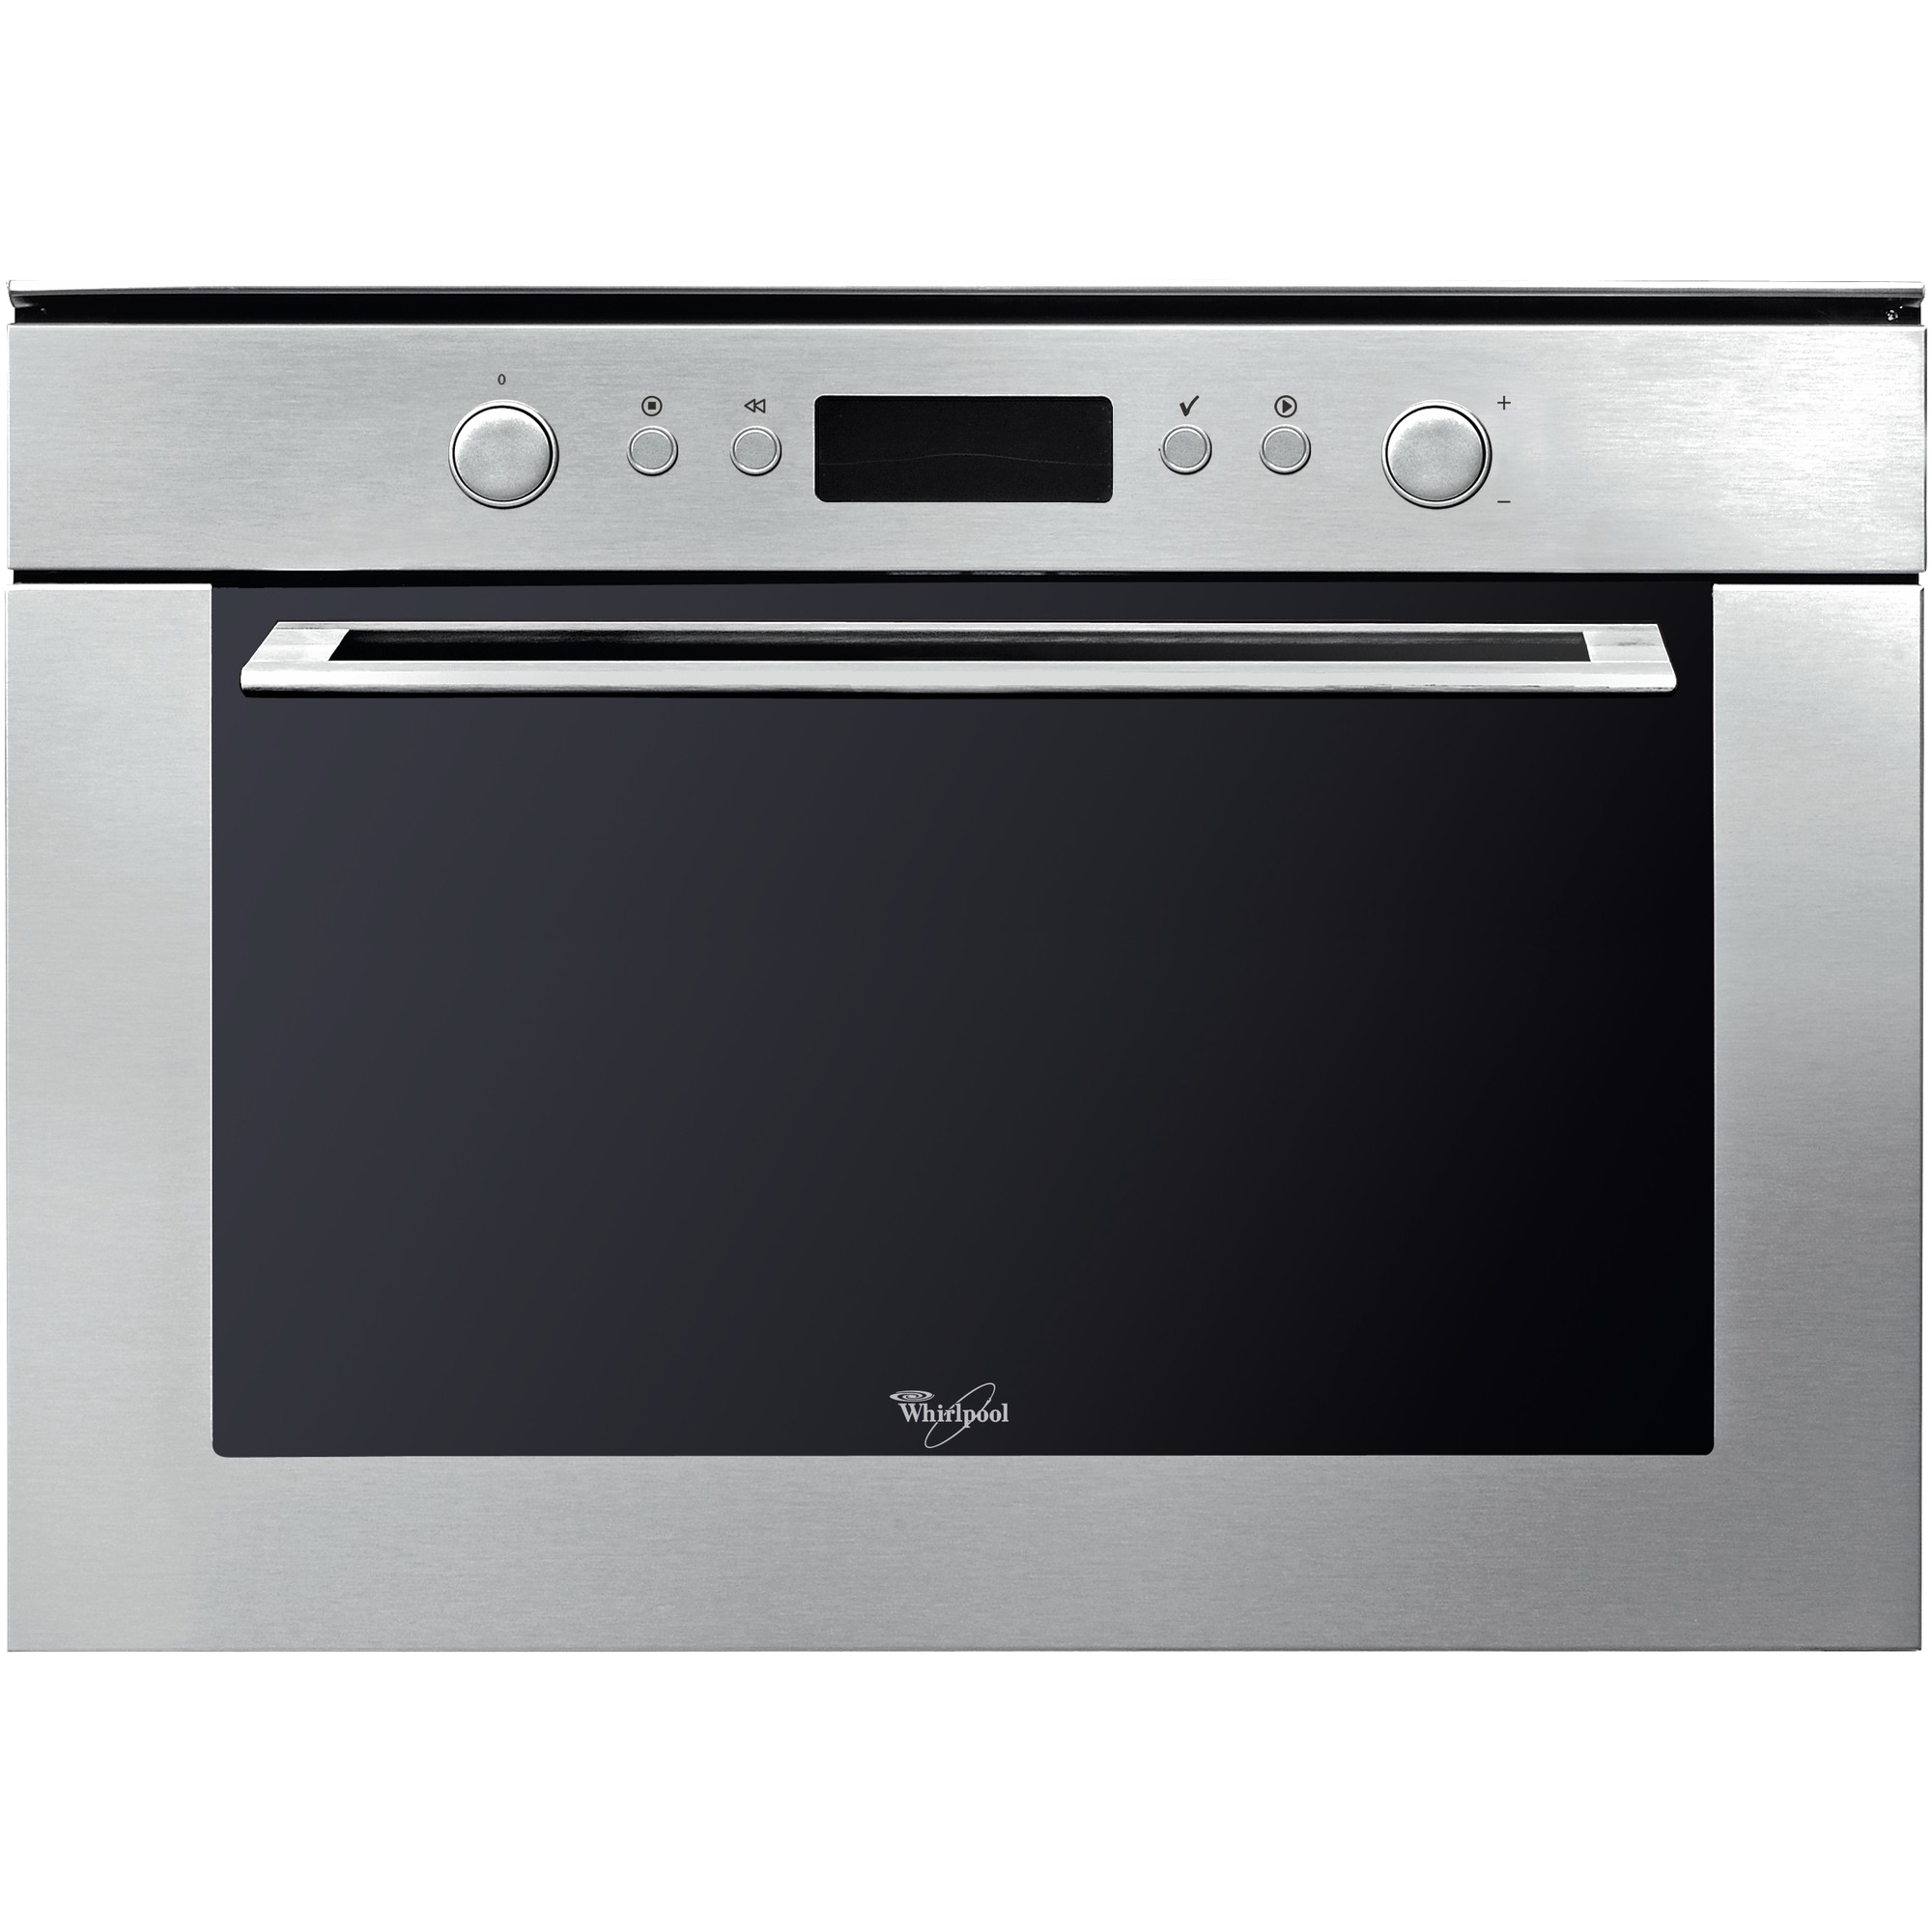 Oven microwave stainless steel PNG Pic